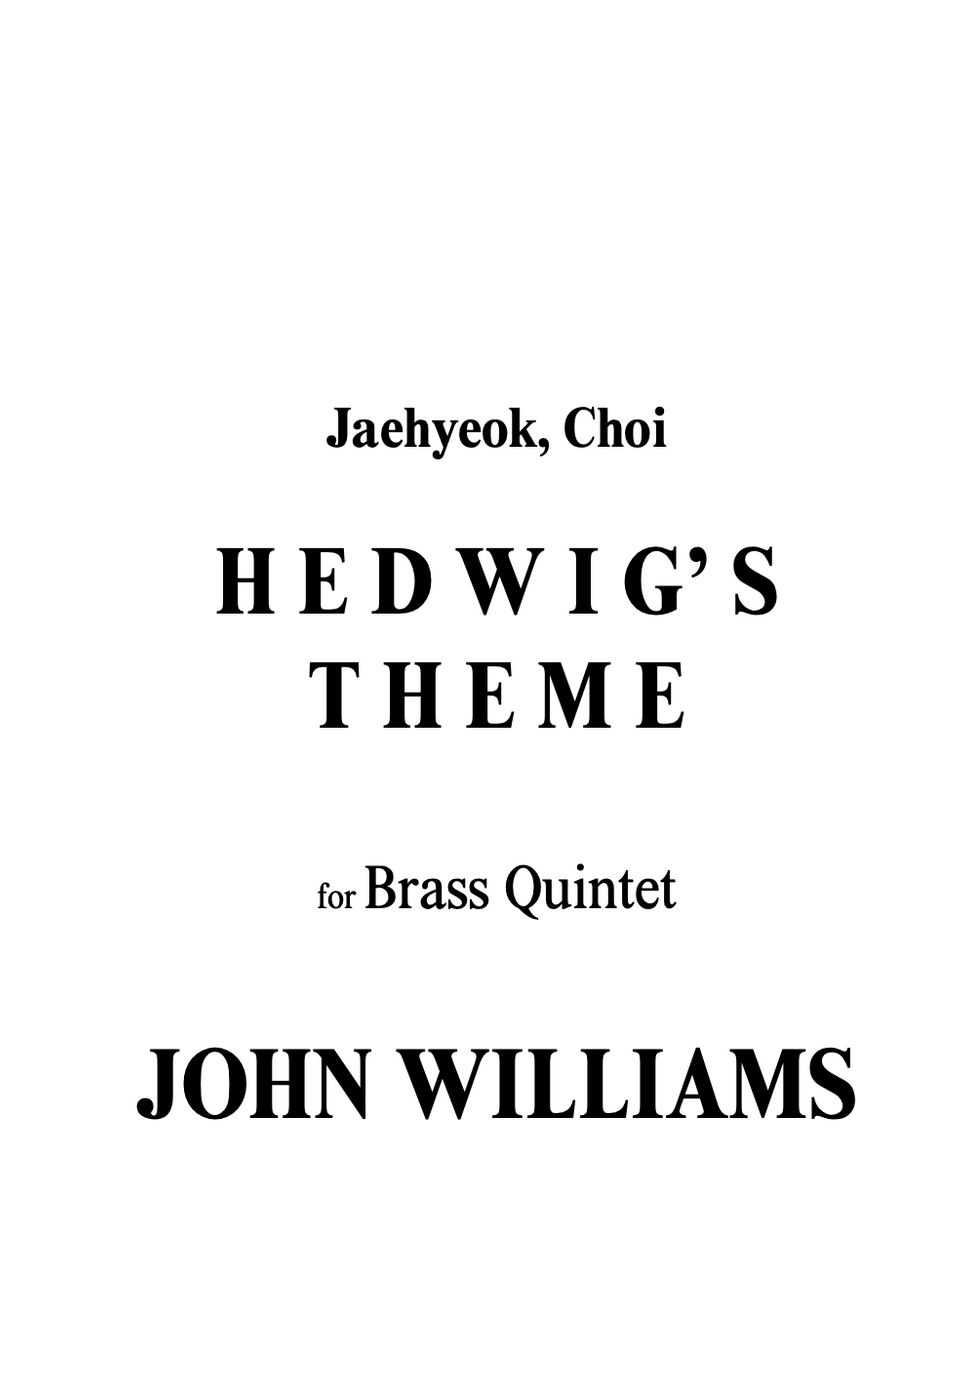 John Williams - Hedwig’s Theme for Brass Quintet by Jaehyeok Choi